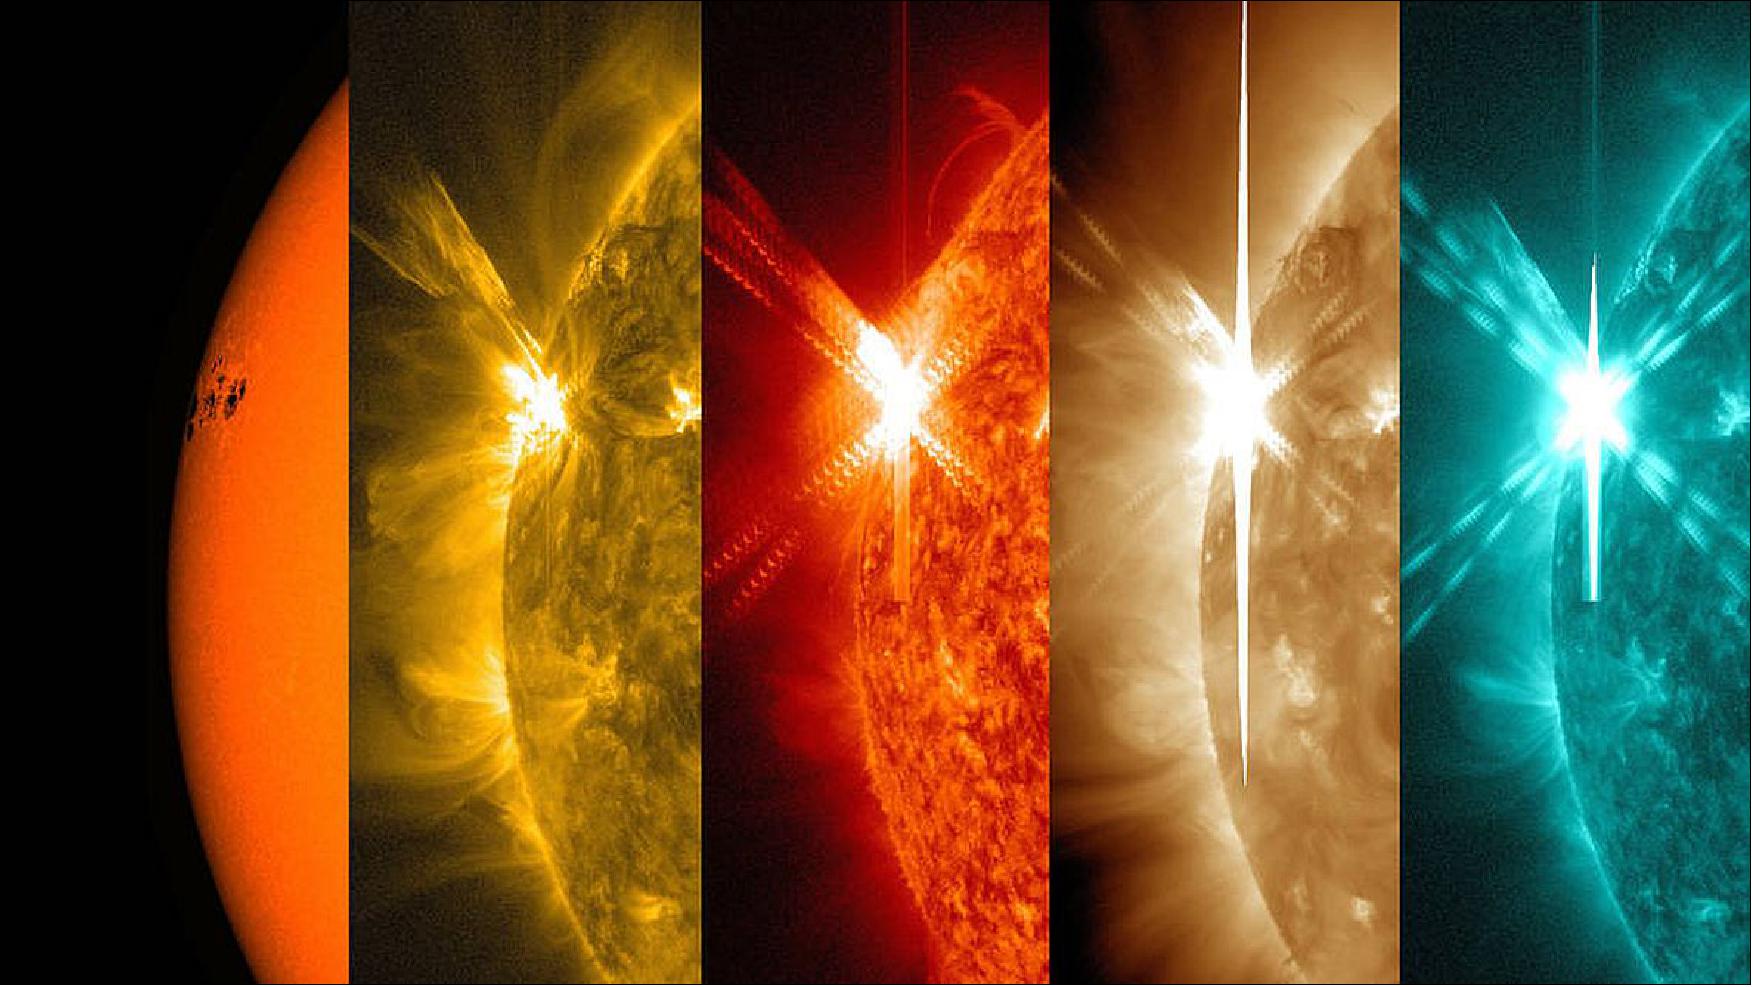 Figure 19: NASA's Solar Dynamics Observatory captured these images of a solar flare – as seen in the bright flash on the left – on May 5, 2015 (image credit: NASA, SDO, Wiesinger)